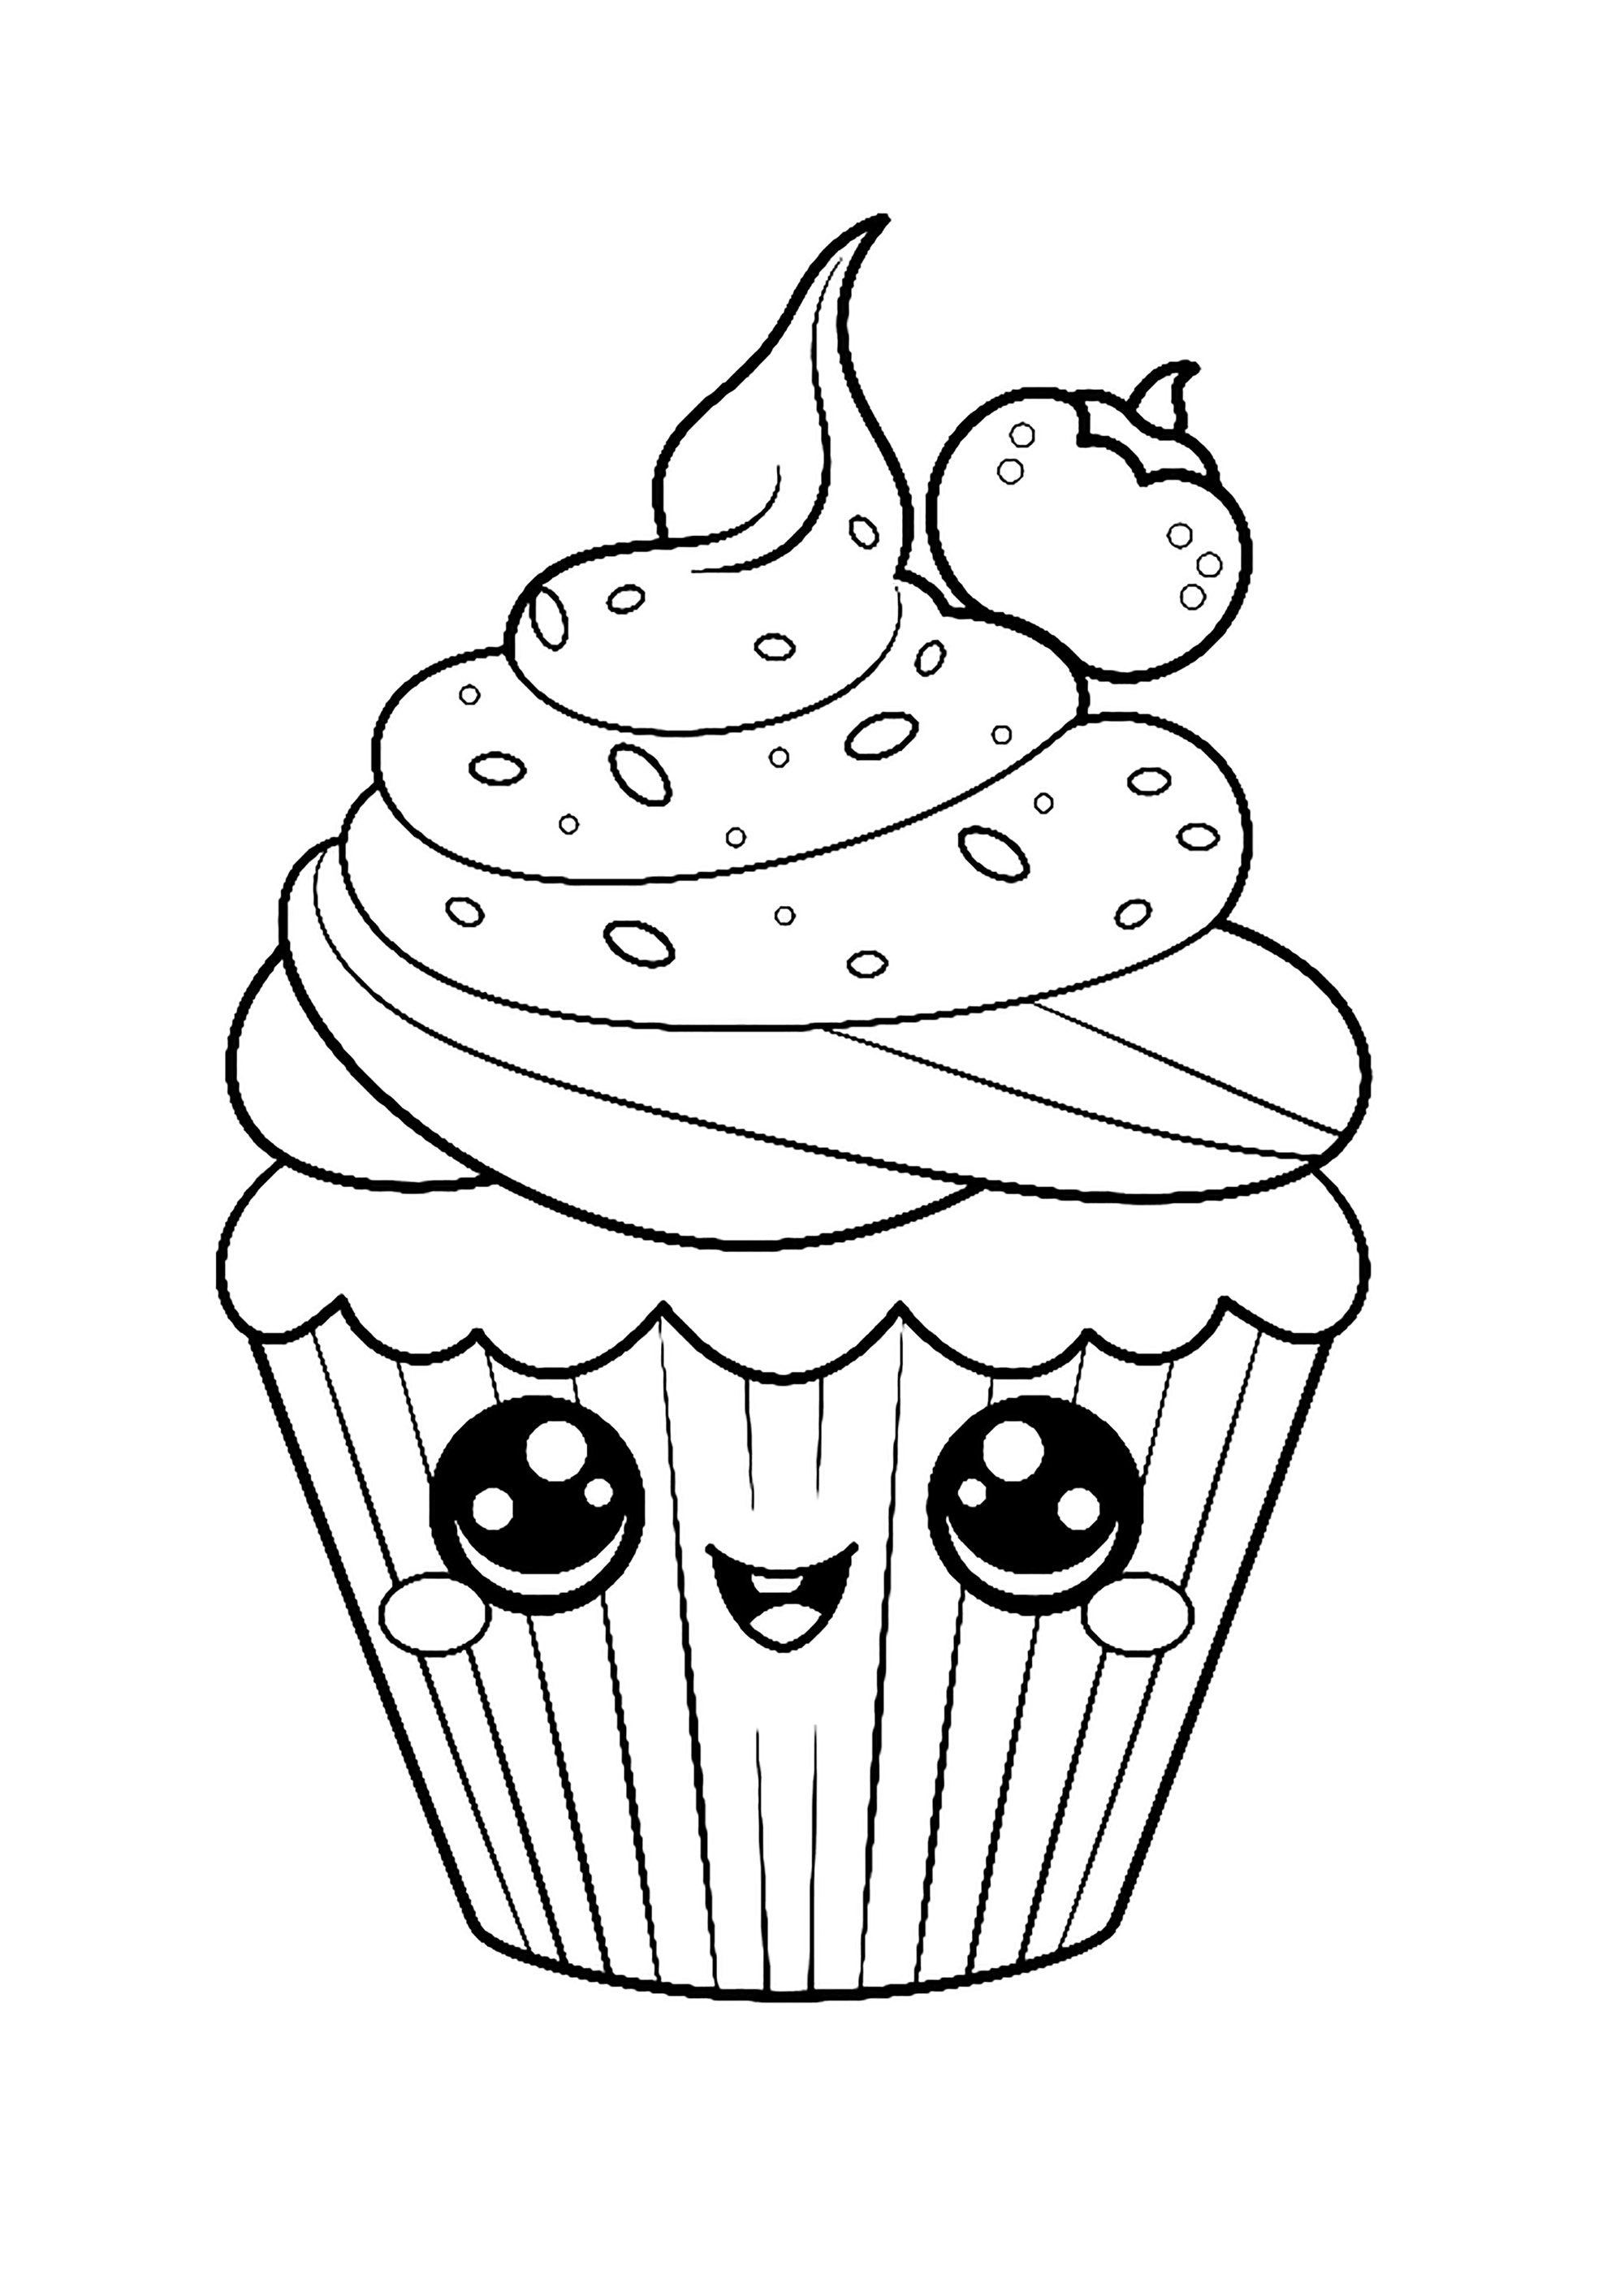 A pretty cupcake to color. Very simple coloring